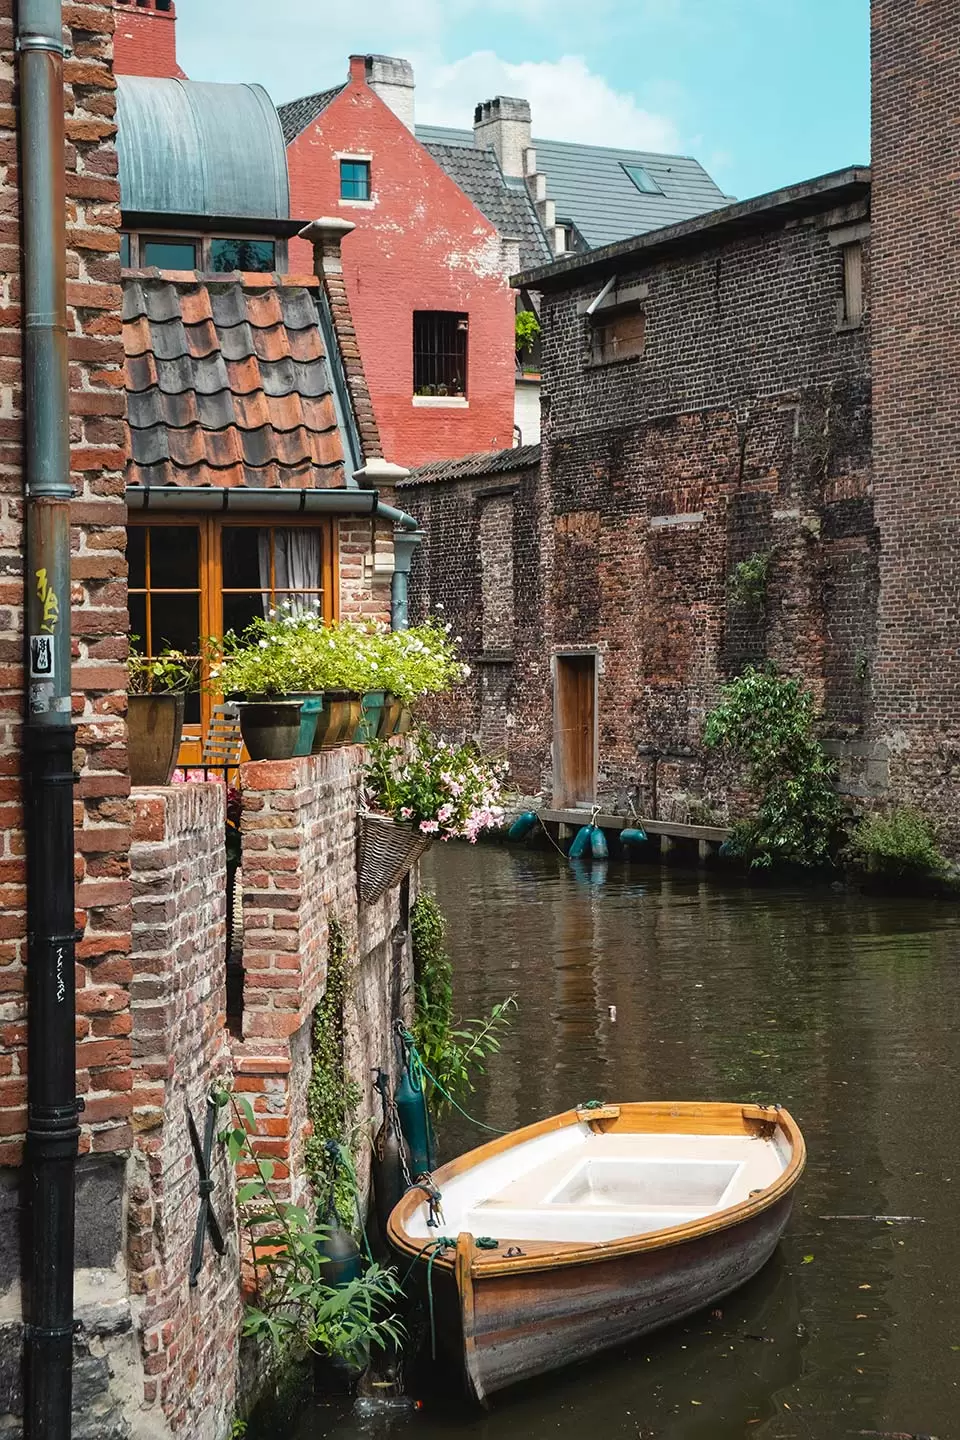 Ghent day trip itinerary - Things to See-in Ghent in One Day Itinerary - Canal and boat in Patershol